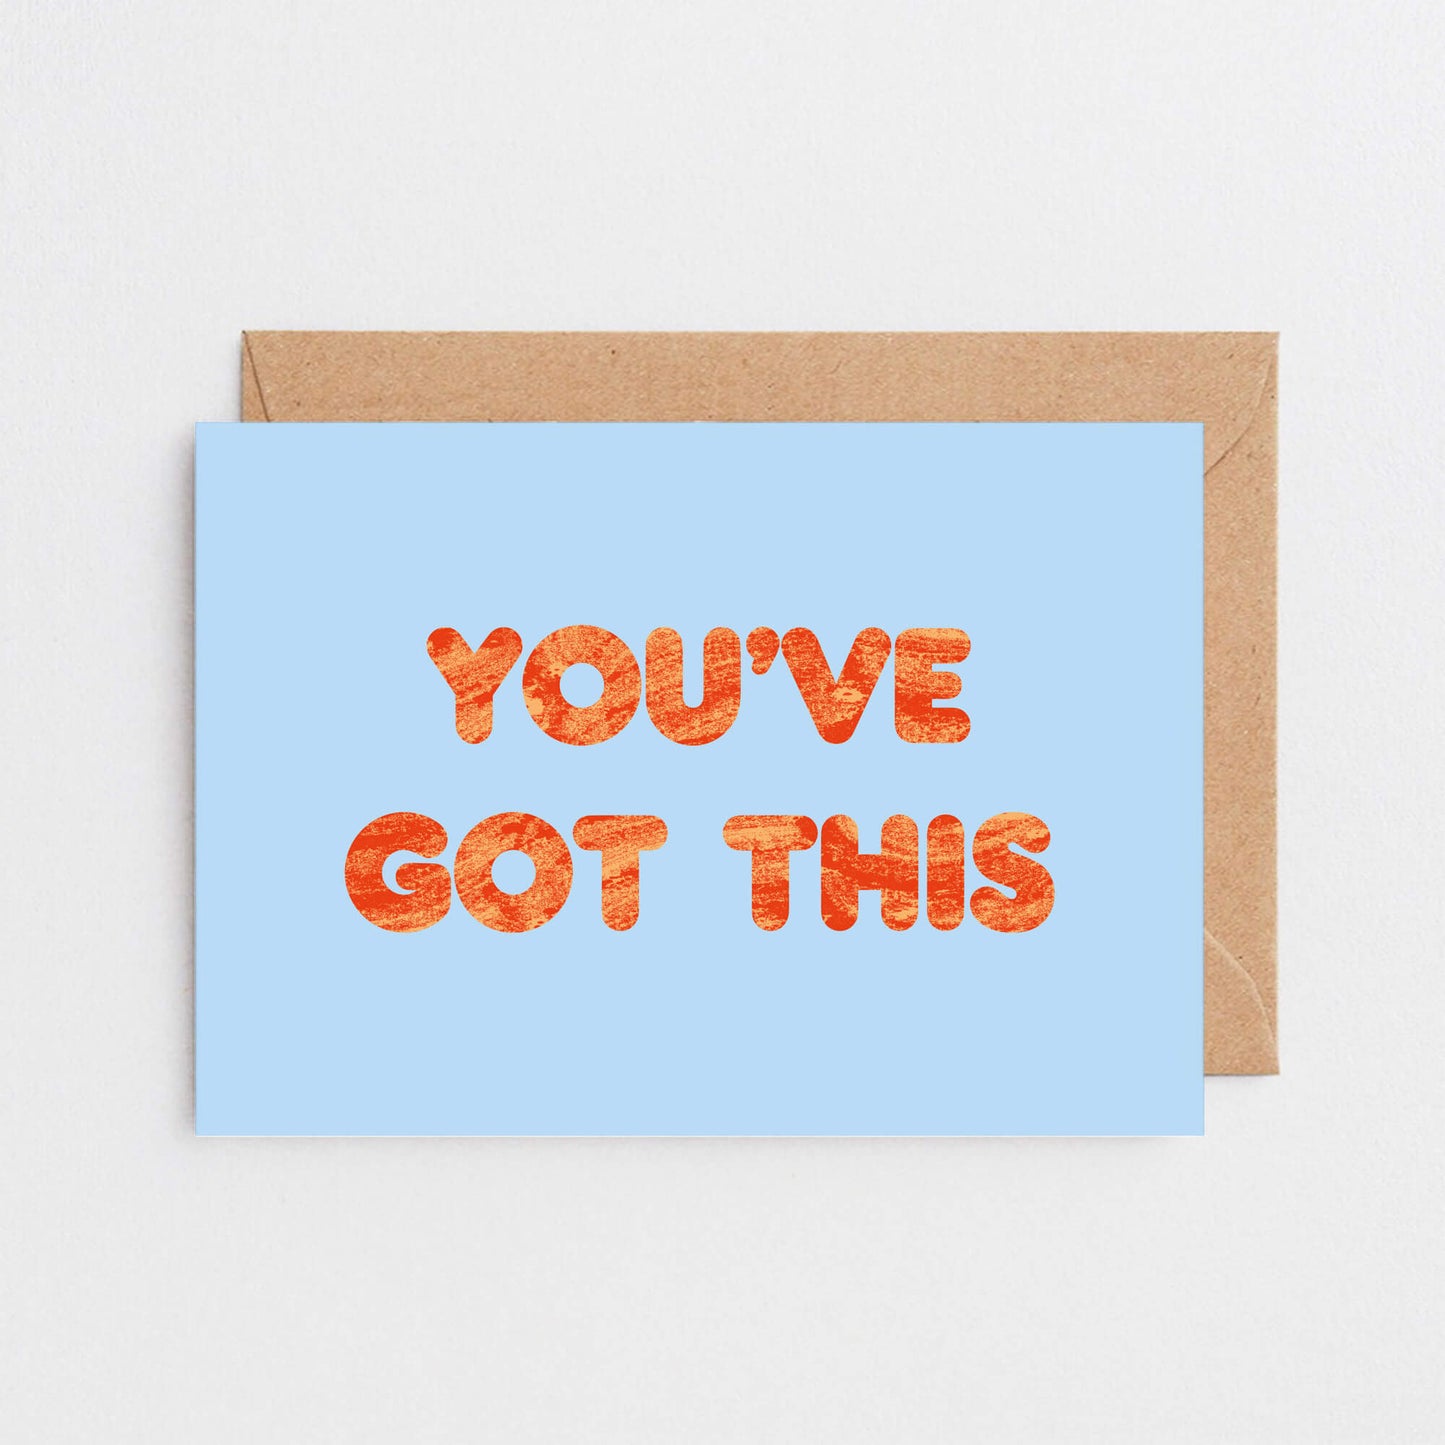 You've Got This Card by SixElevenCreations. Product Code SE5109A6